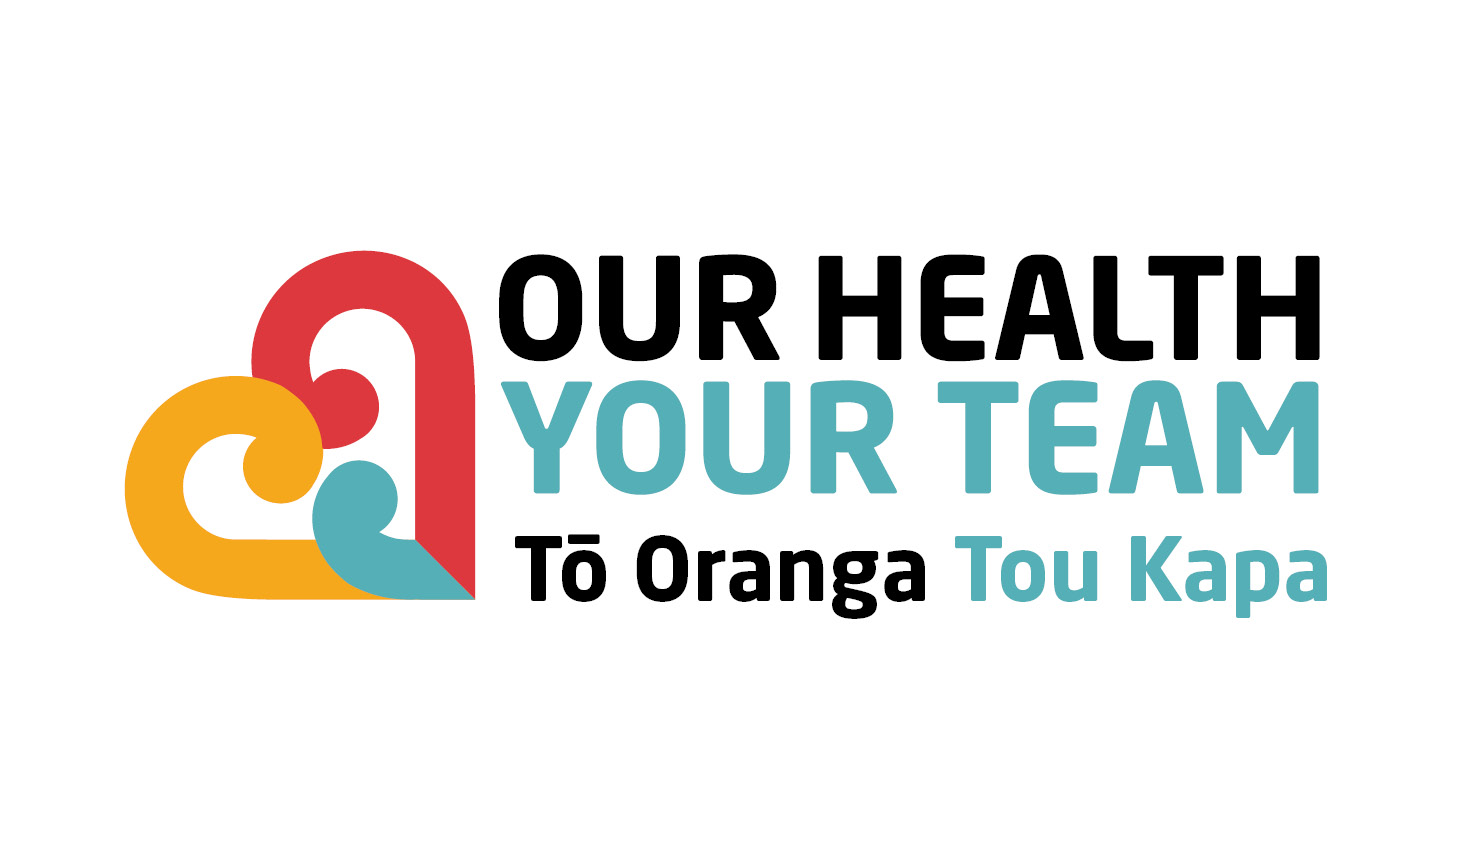 Our-health-your-team-banner.jpg